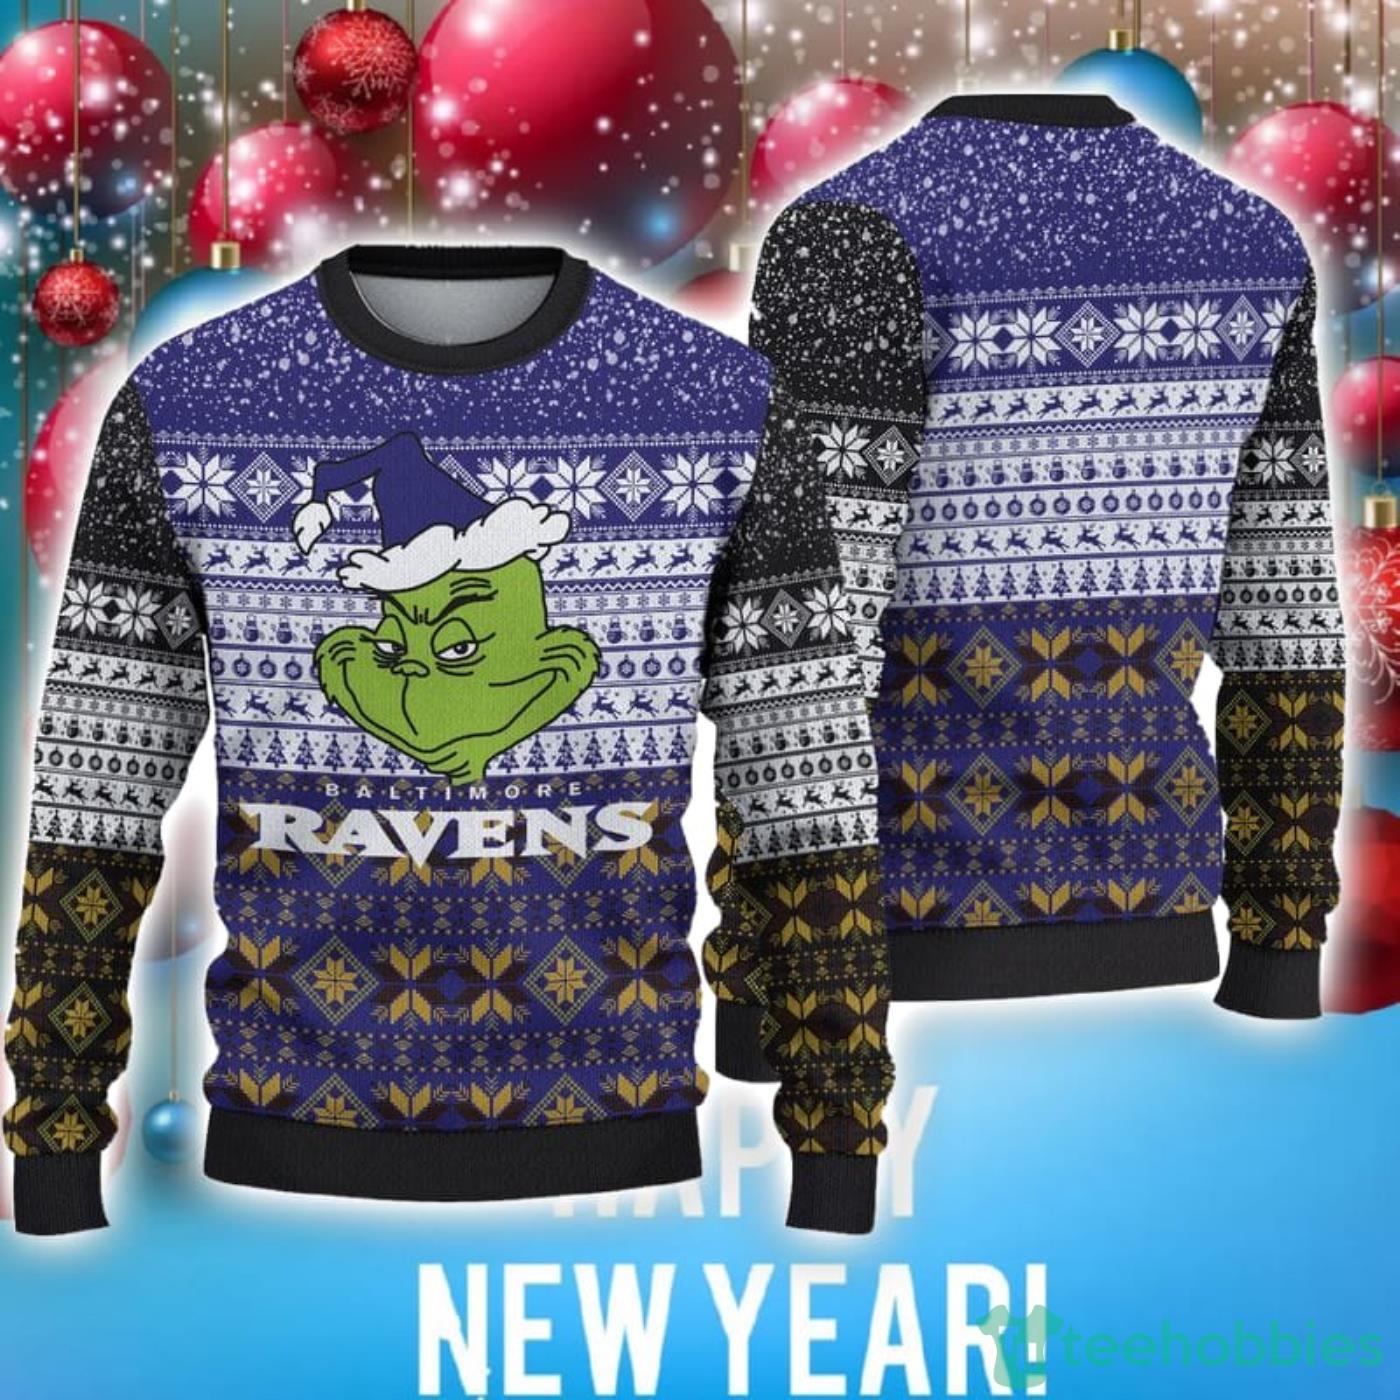 Baltimore Ravens Christmas Grch Special Trend Ugly Christmas Sweater Product Photo 1